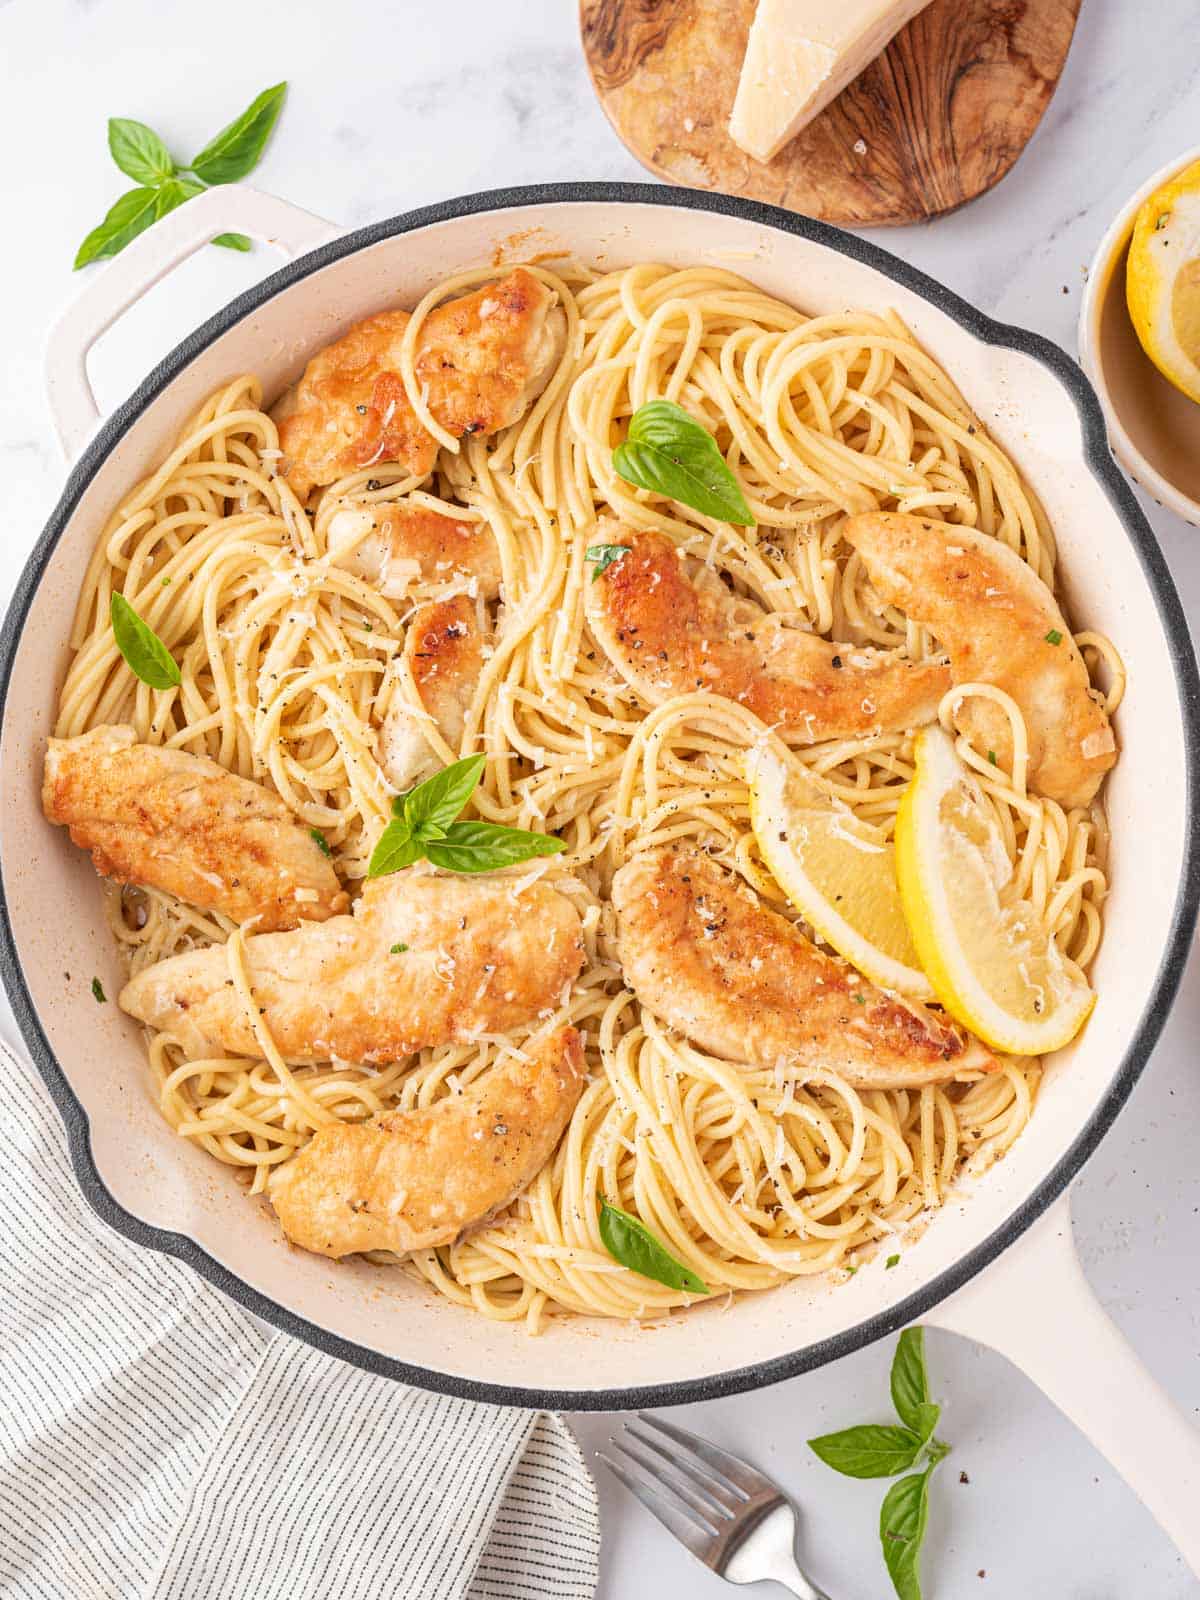 Chicken scampi with pasta in a bowl with a block of fresh parmesan in the background.